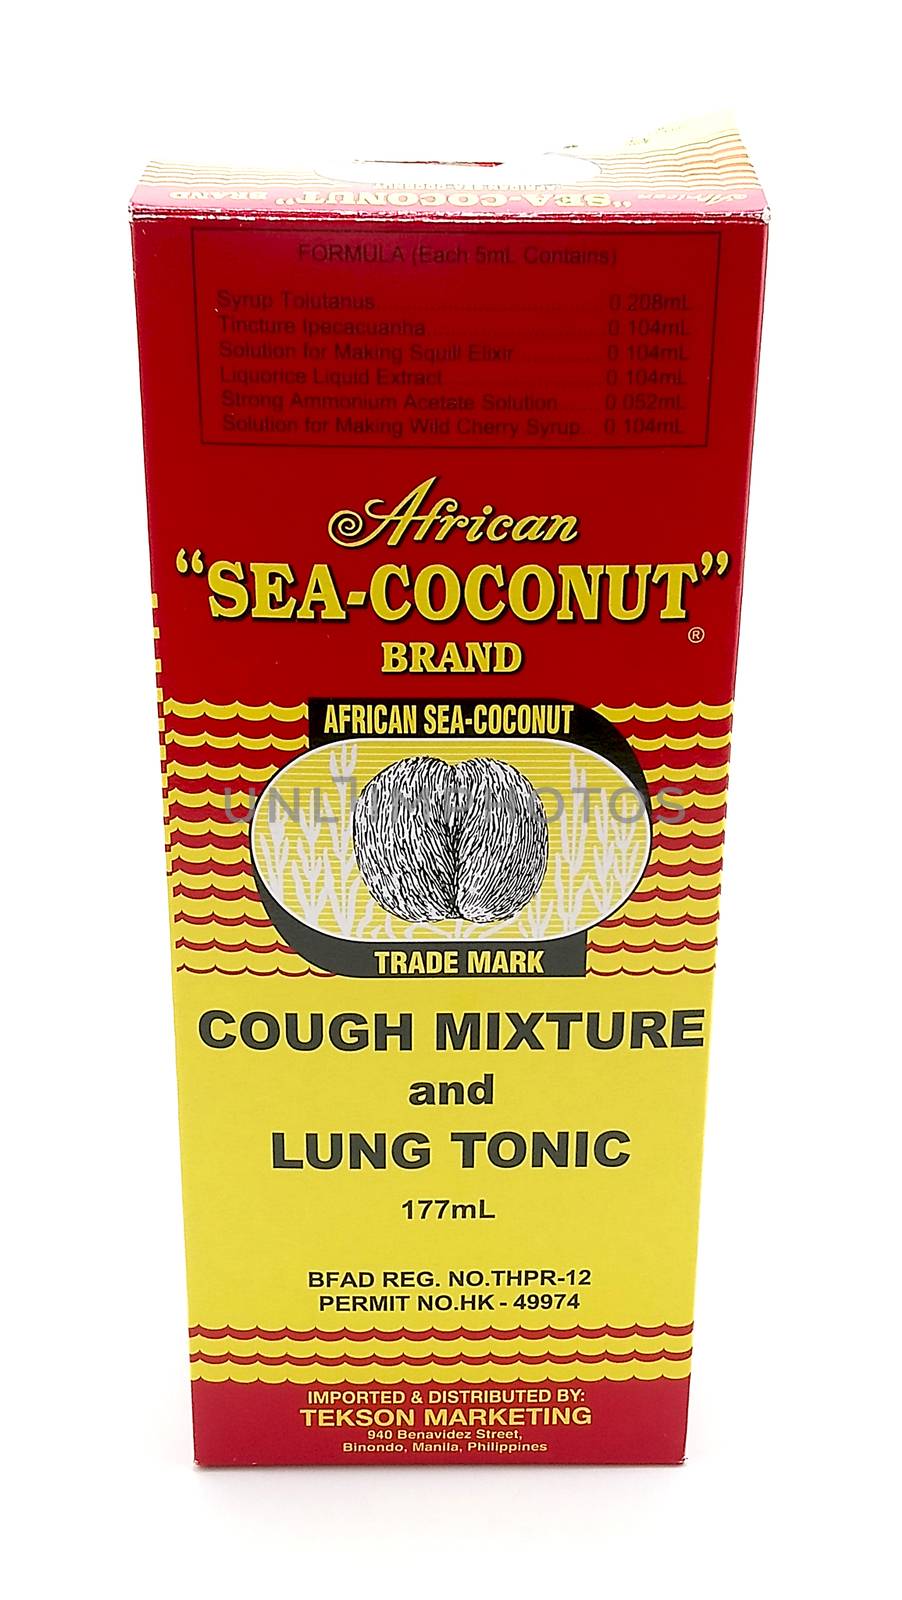 MANILA, PH - JUNE 23 - African sea coconut brand cough mixture and lung tonic syrup on June 23, 2020 in Manila, Philippines.